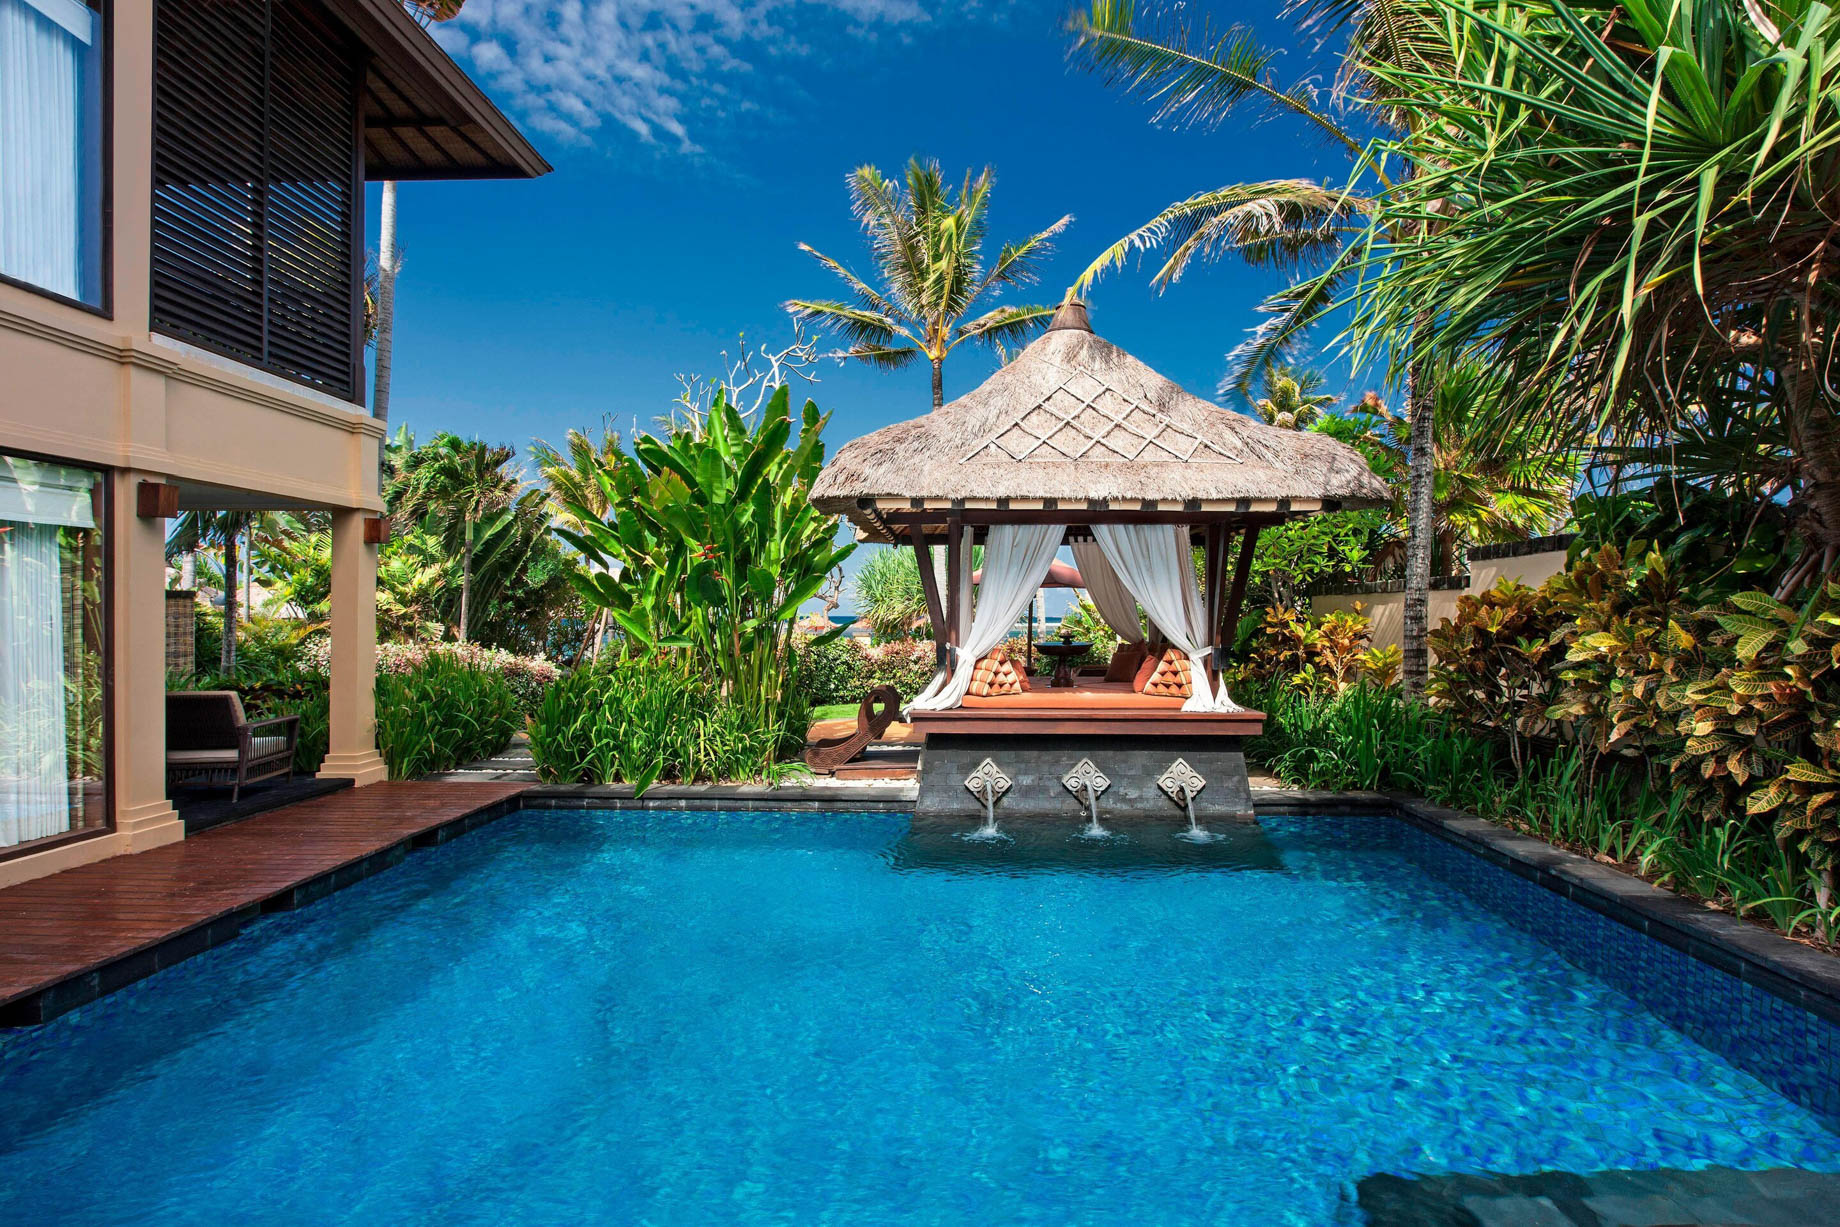 The St. Regis Bali Resort – Bali, Indonesia – Strand Residence Guest Room Private Pool